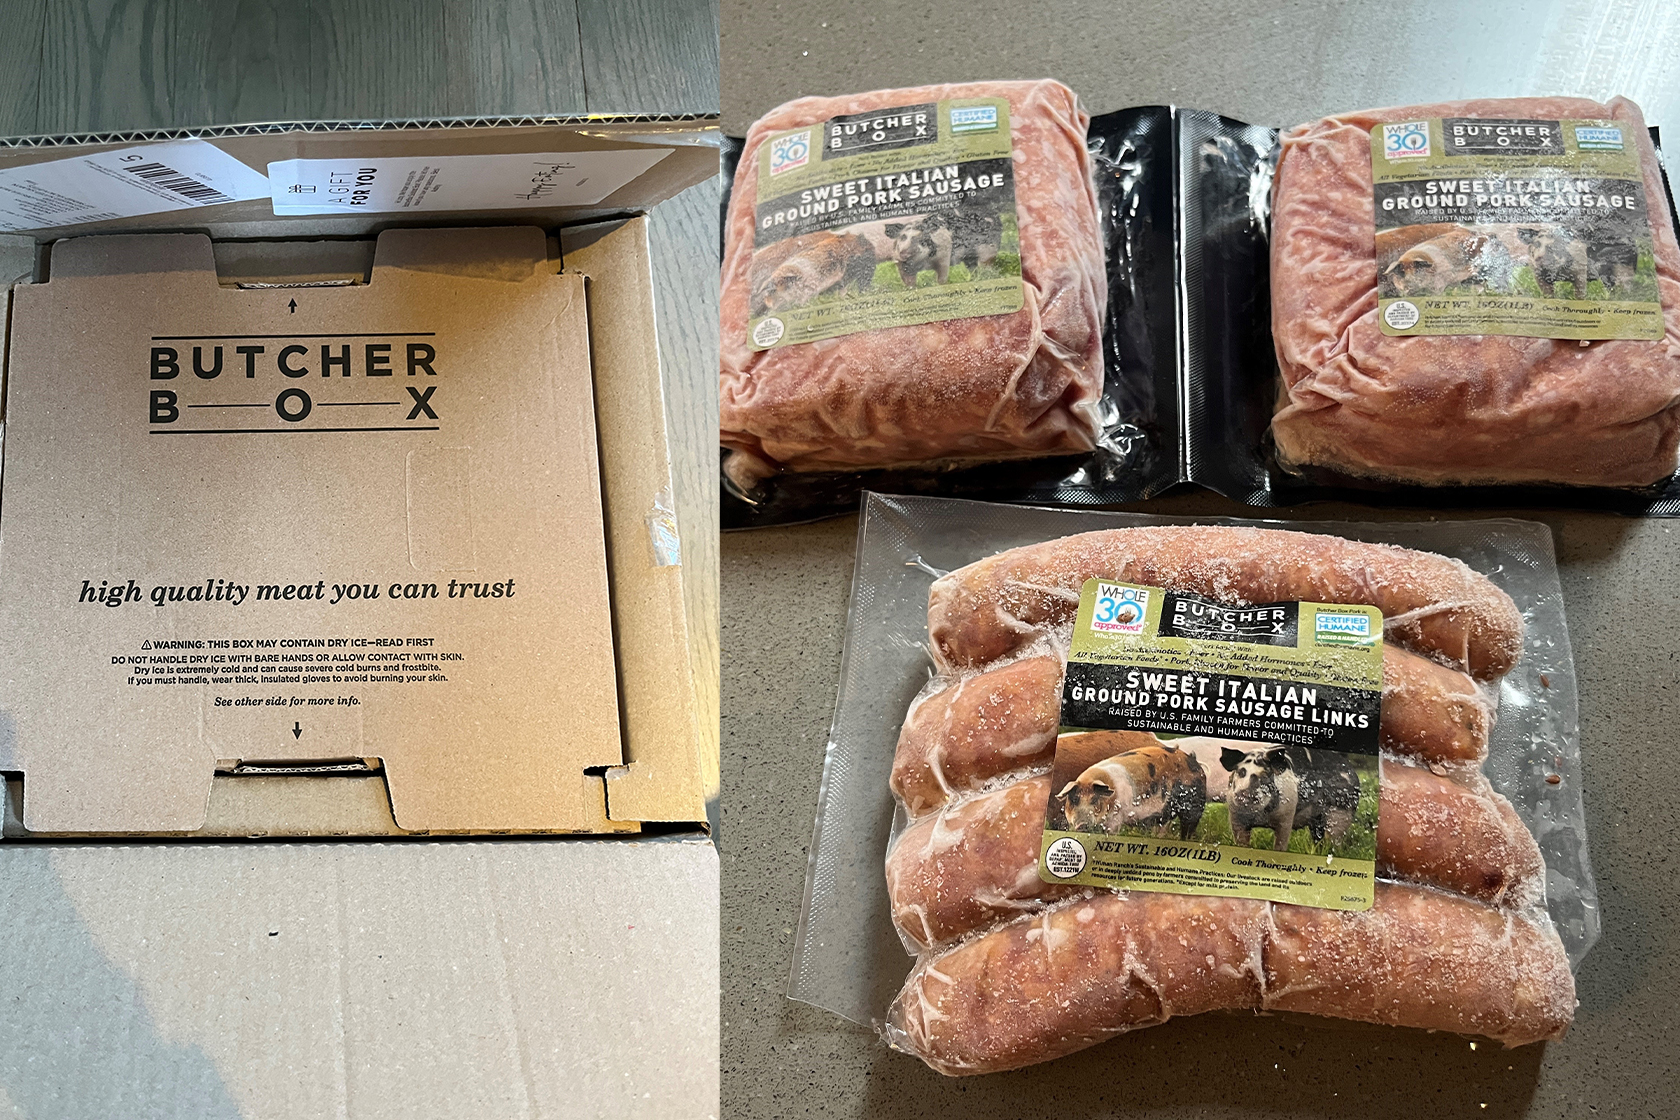 ButcherBox Review: Is It Worth It? - What You Need To Know